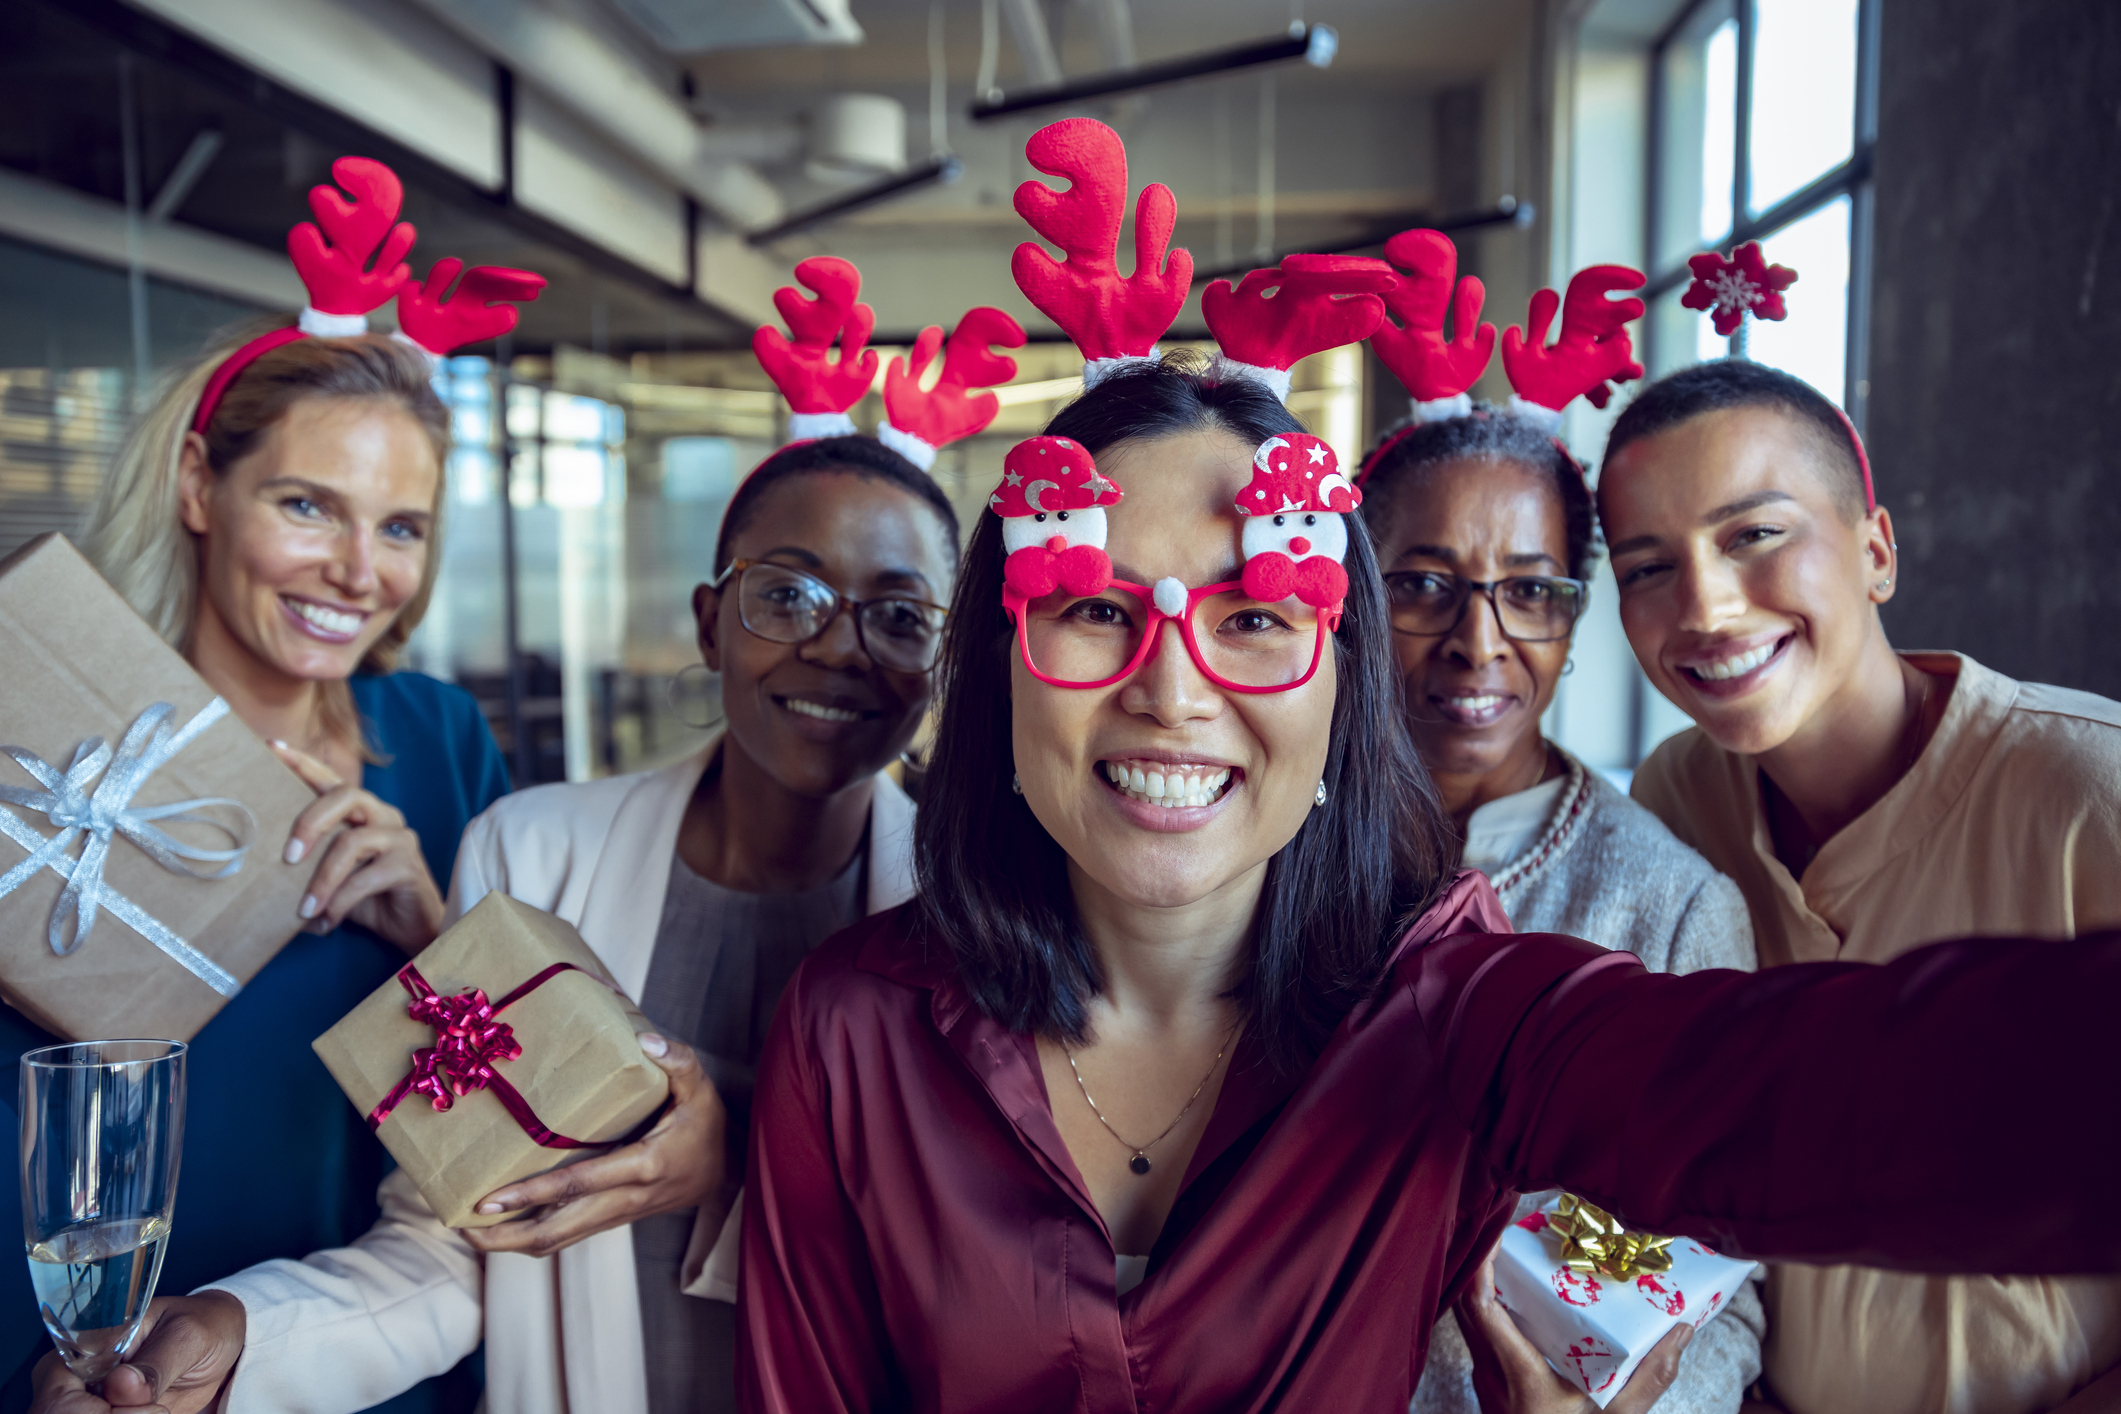 Coworkers wearing festive antlers pose for a selfie at a work holiday party